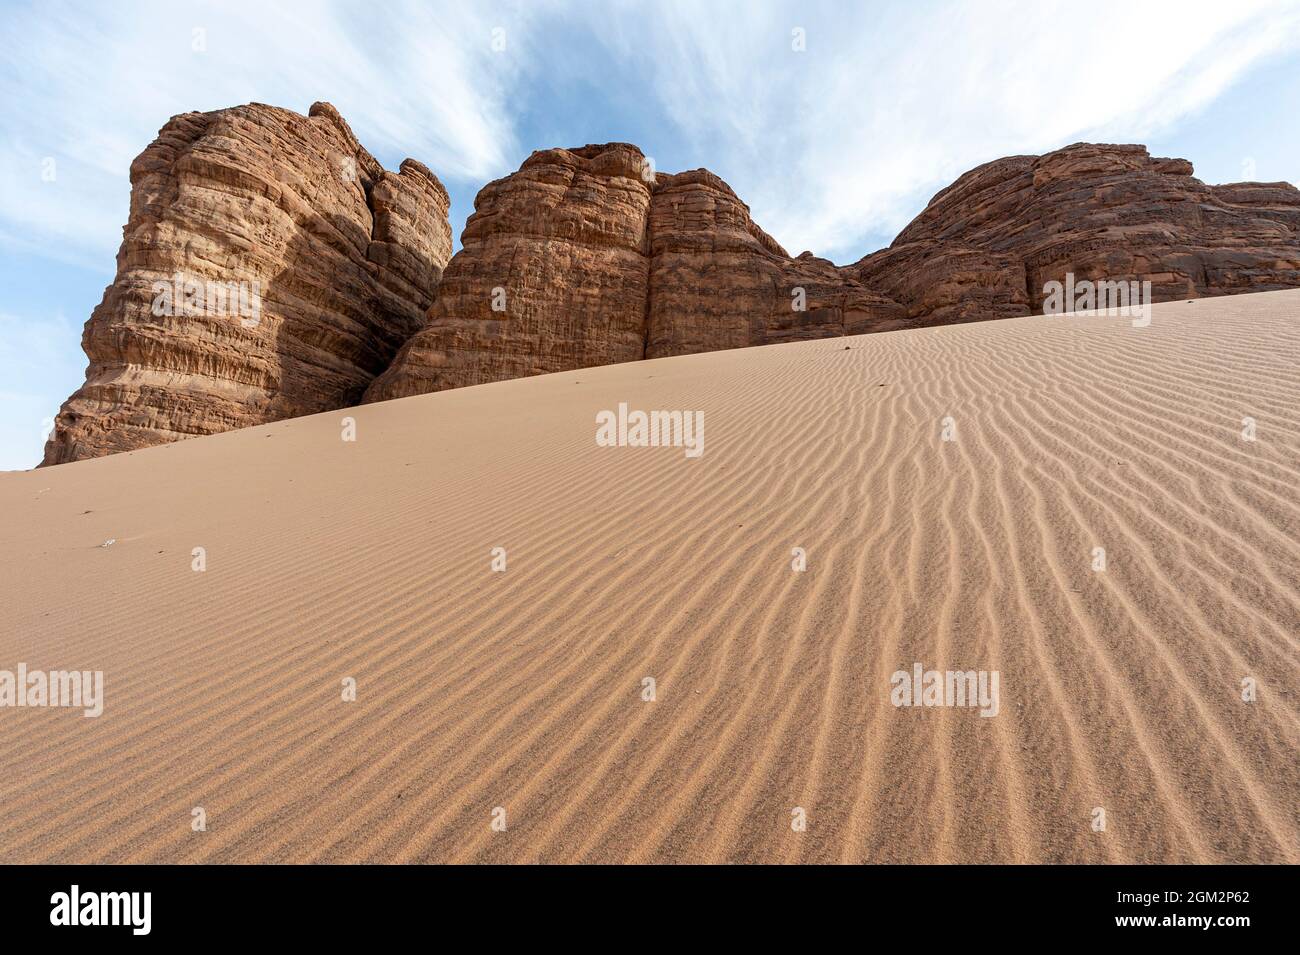 Sandstone rock formations of crazy shapes in the desert near Medina and AlUla and Madain Saleh in Saudi Arabia Stock Photo